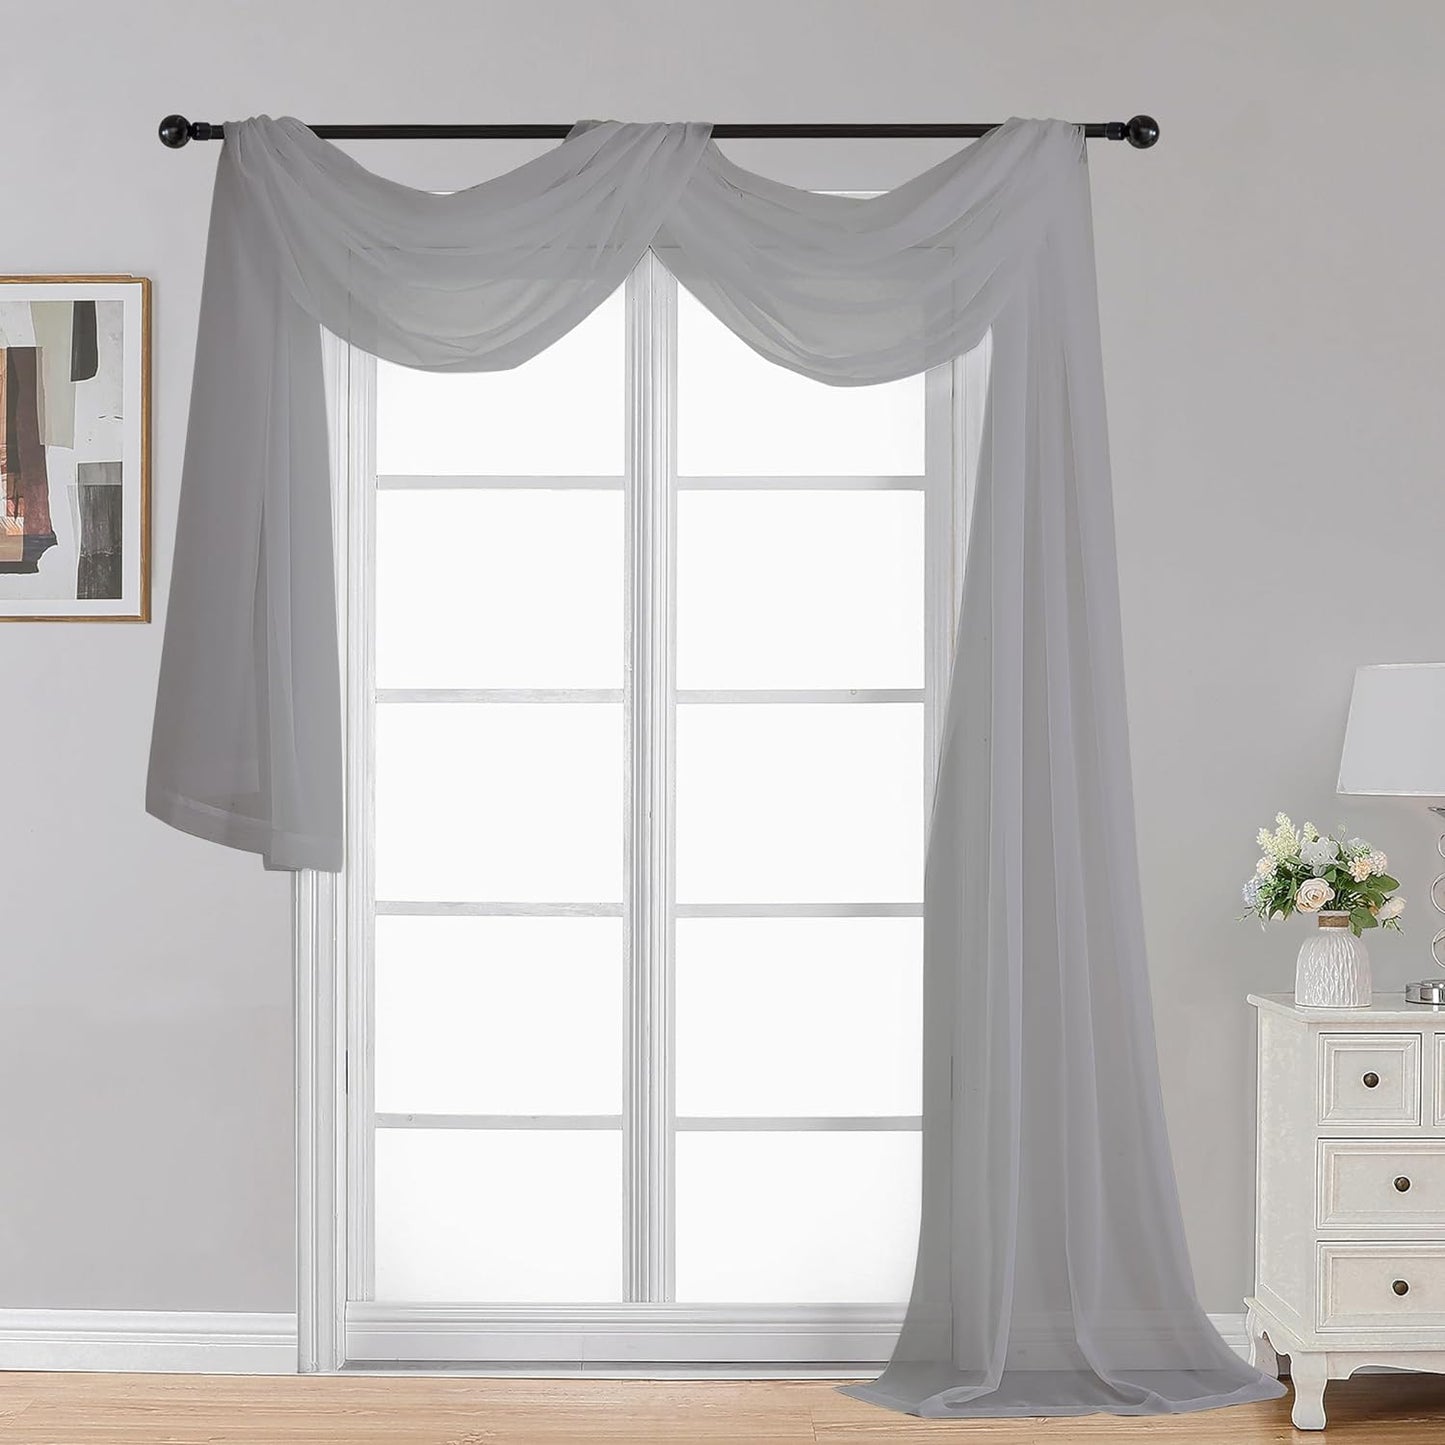 OWENIE White Sheer Valance for Window, Small Short Rod Pocket Voile Valance Curtain Window Treatment Decor for Living Room Bathroom Kitchen Cafe Laundry Basement, 60" W X 14" L  OWENIE Grey 42W X 216L 